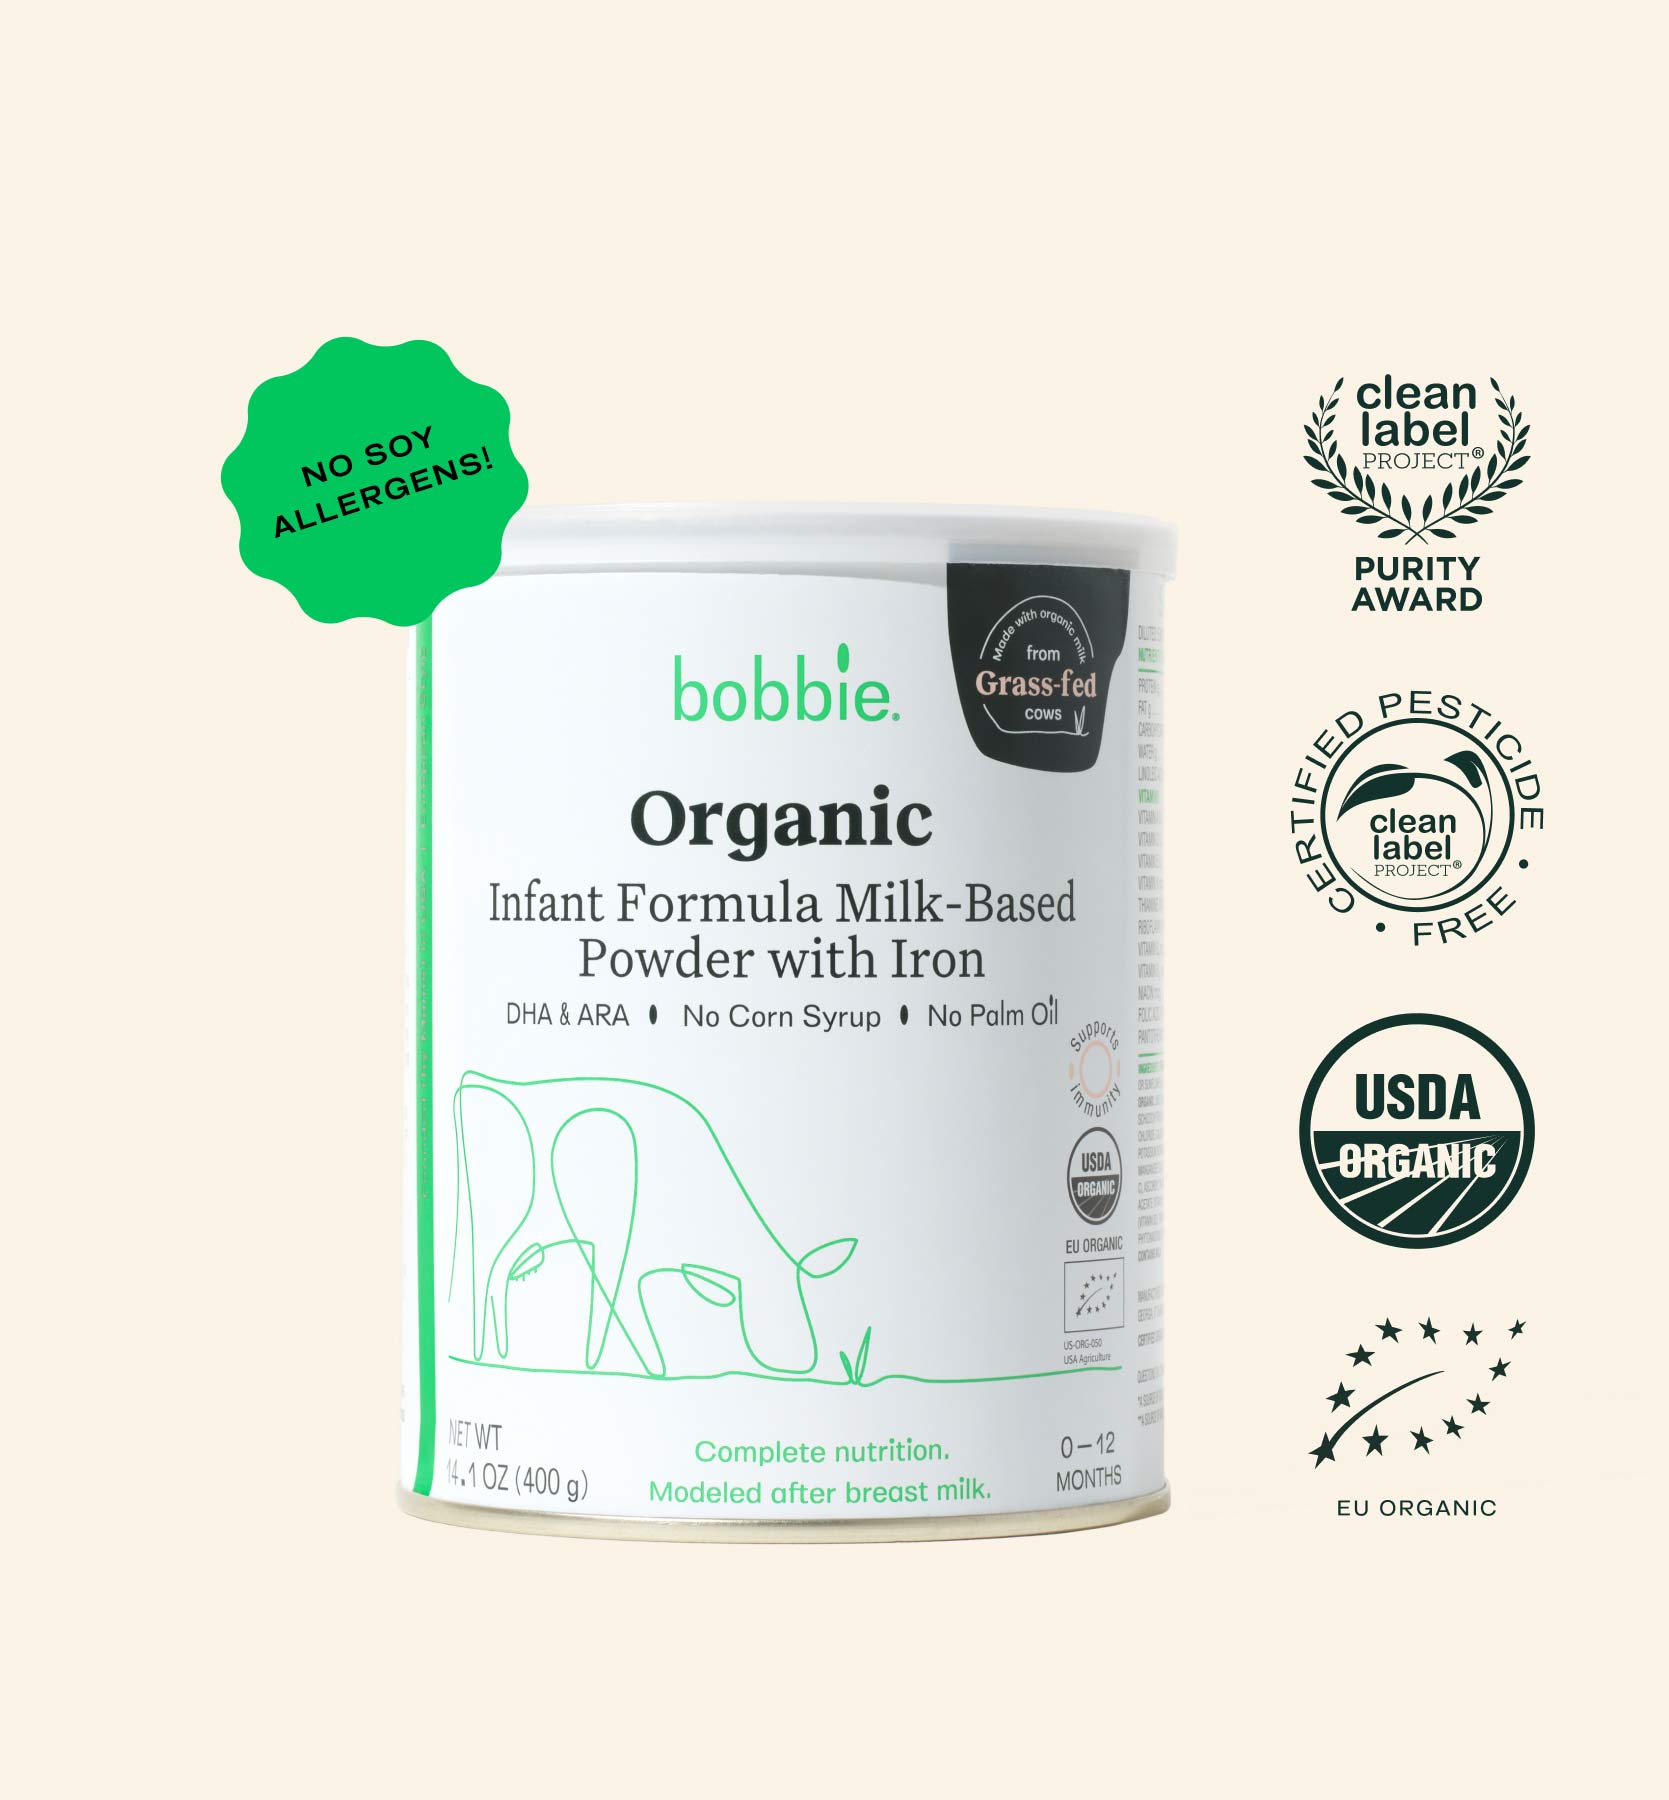 Can of Bobbie Infant Formula with Clean Label Purity and Pesticide Free Badges, as well as USDA and EU Organic labels.